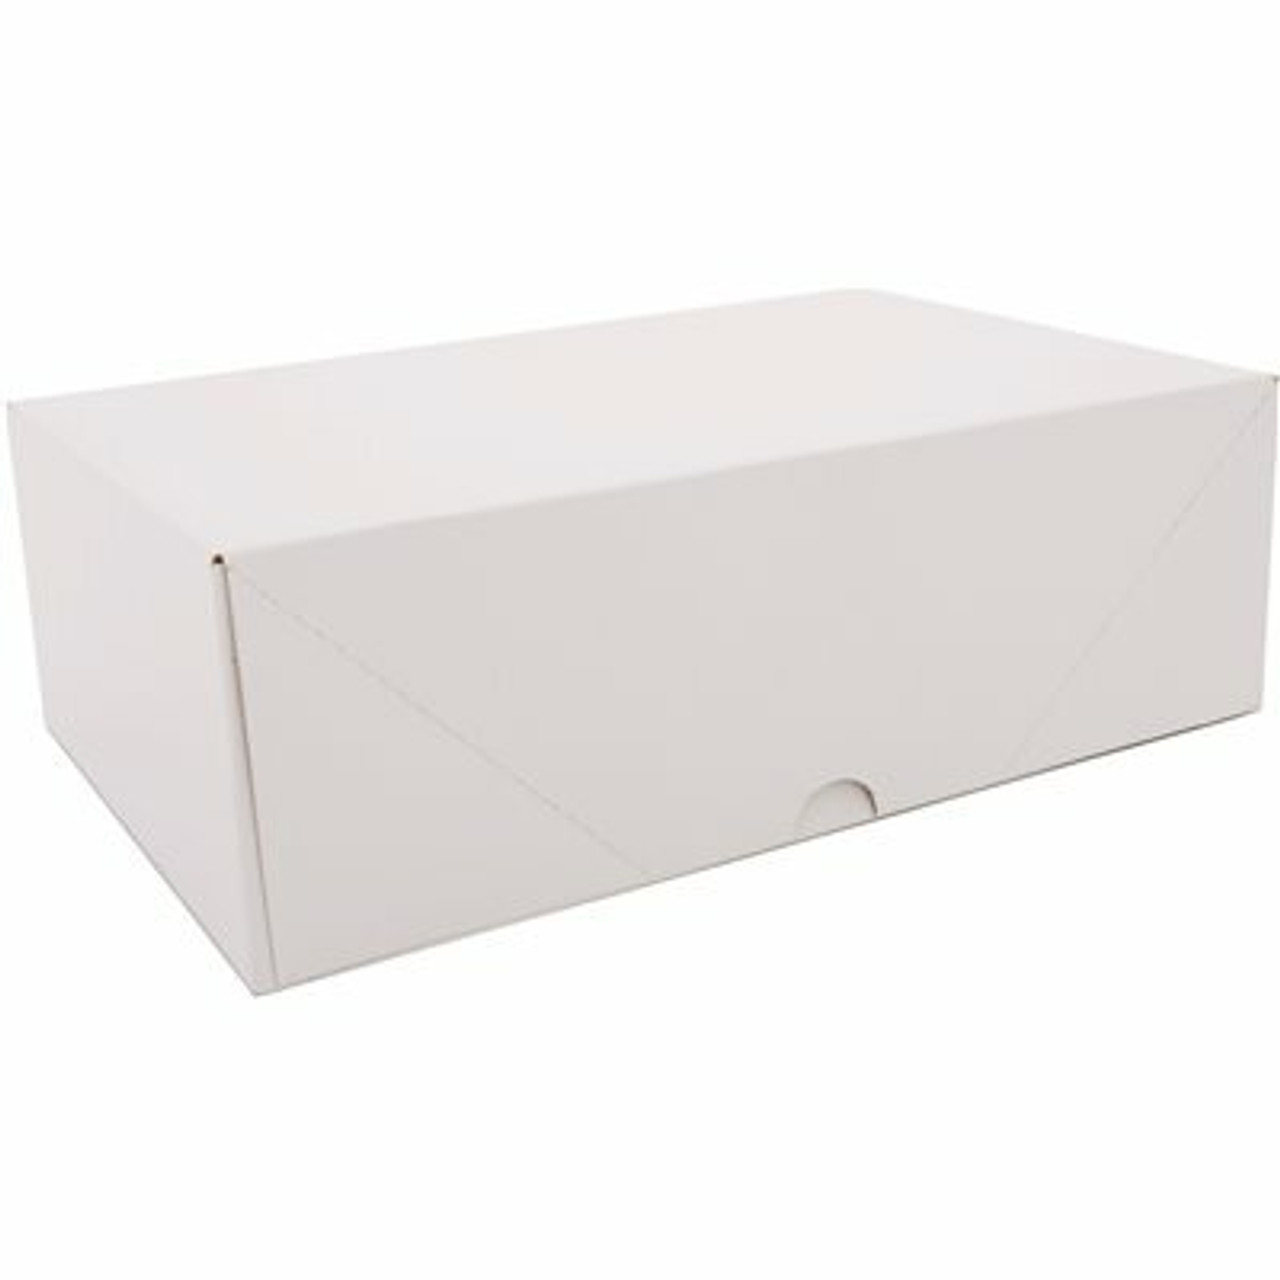 Southern Champion Tray 12 In. X 7.75 In. X 4 In. 2-Piece White Sausage Box (125 Per Case)